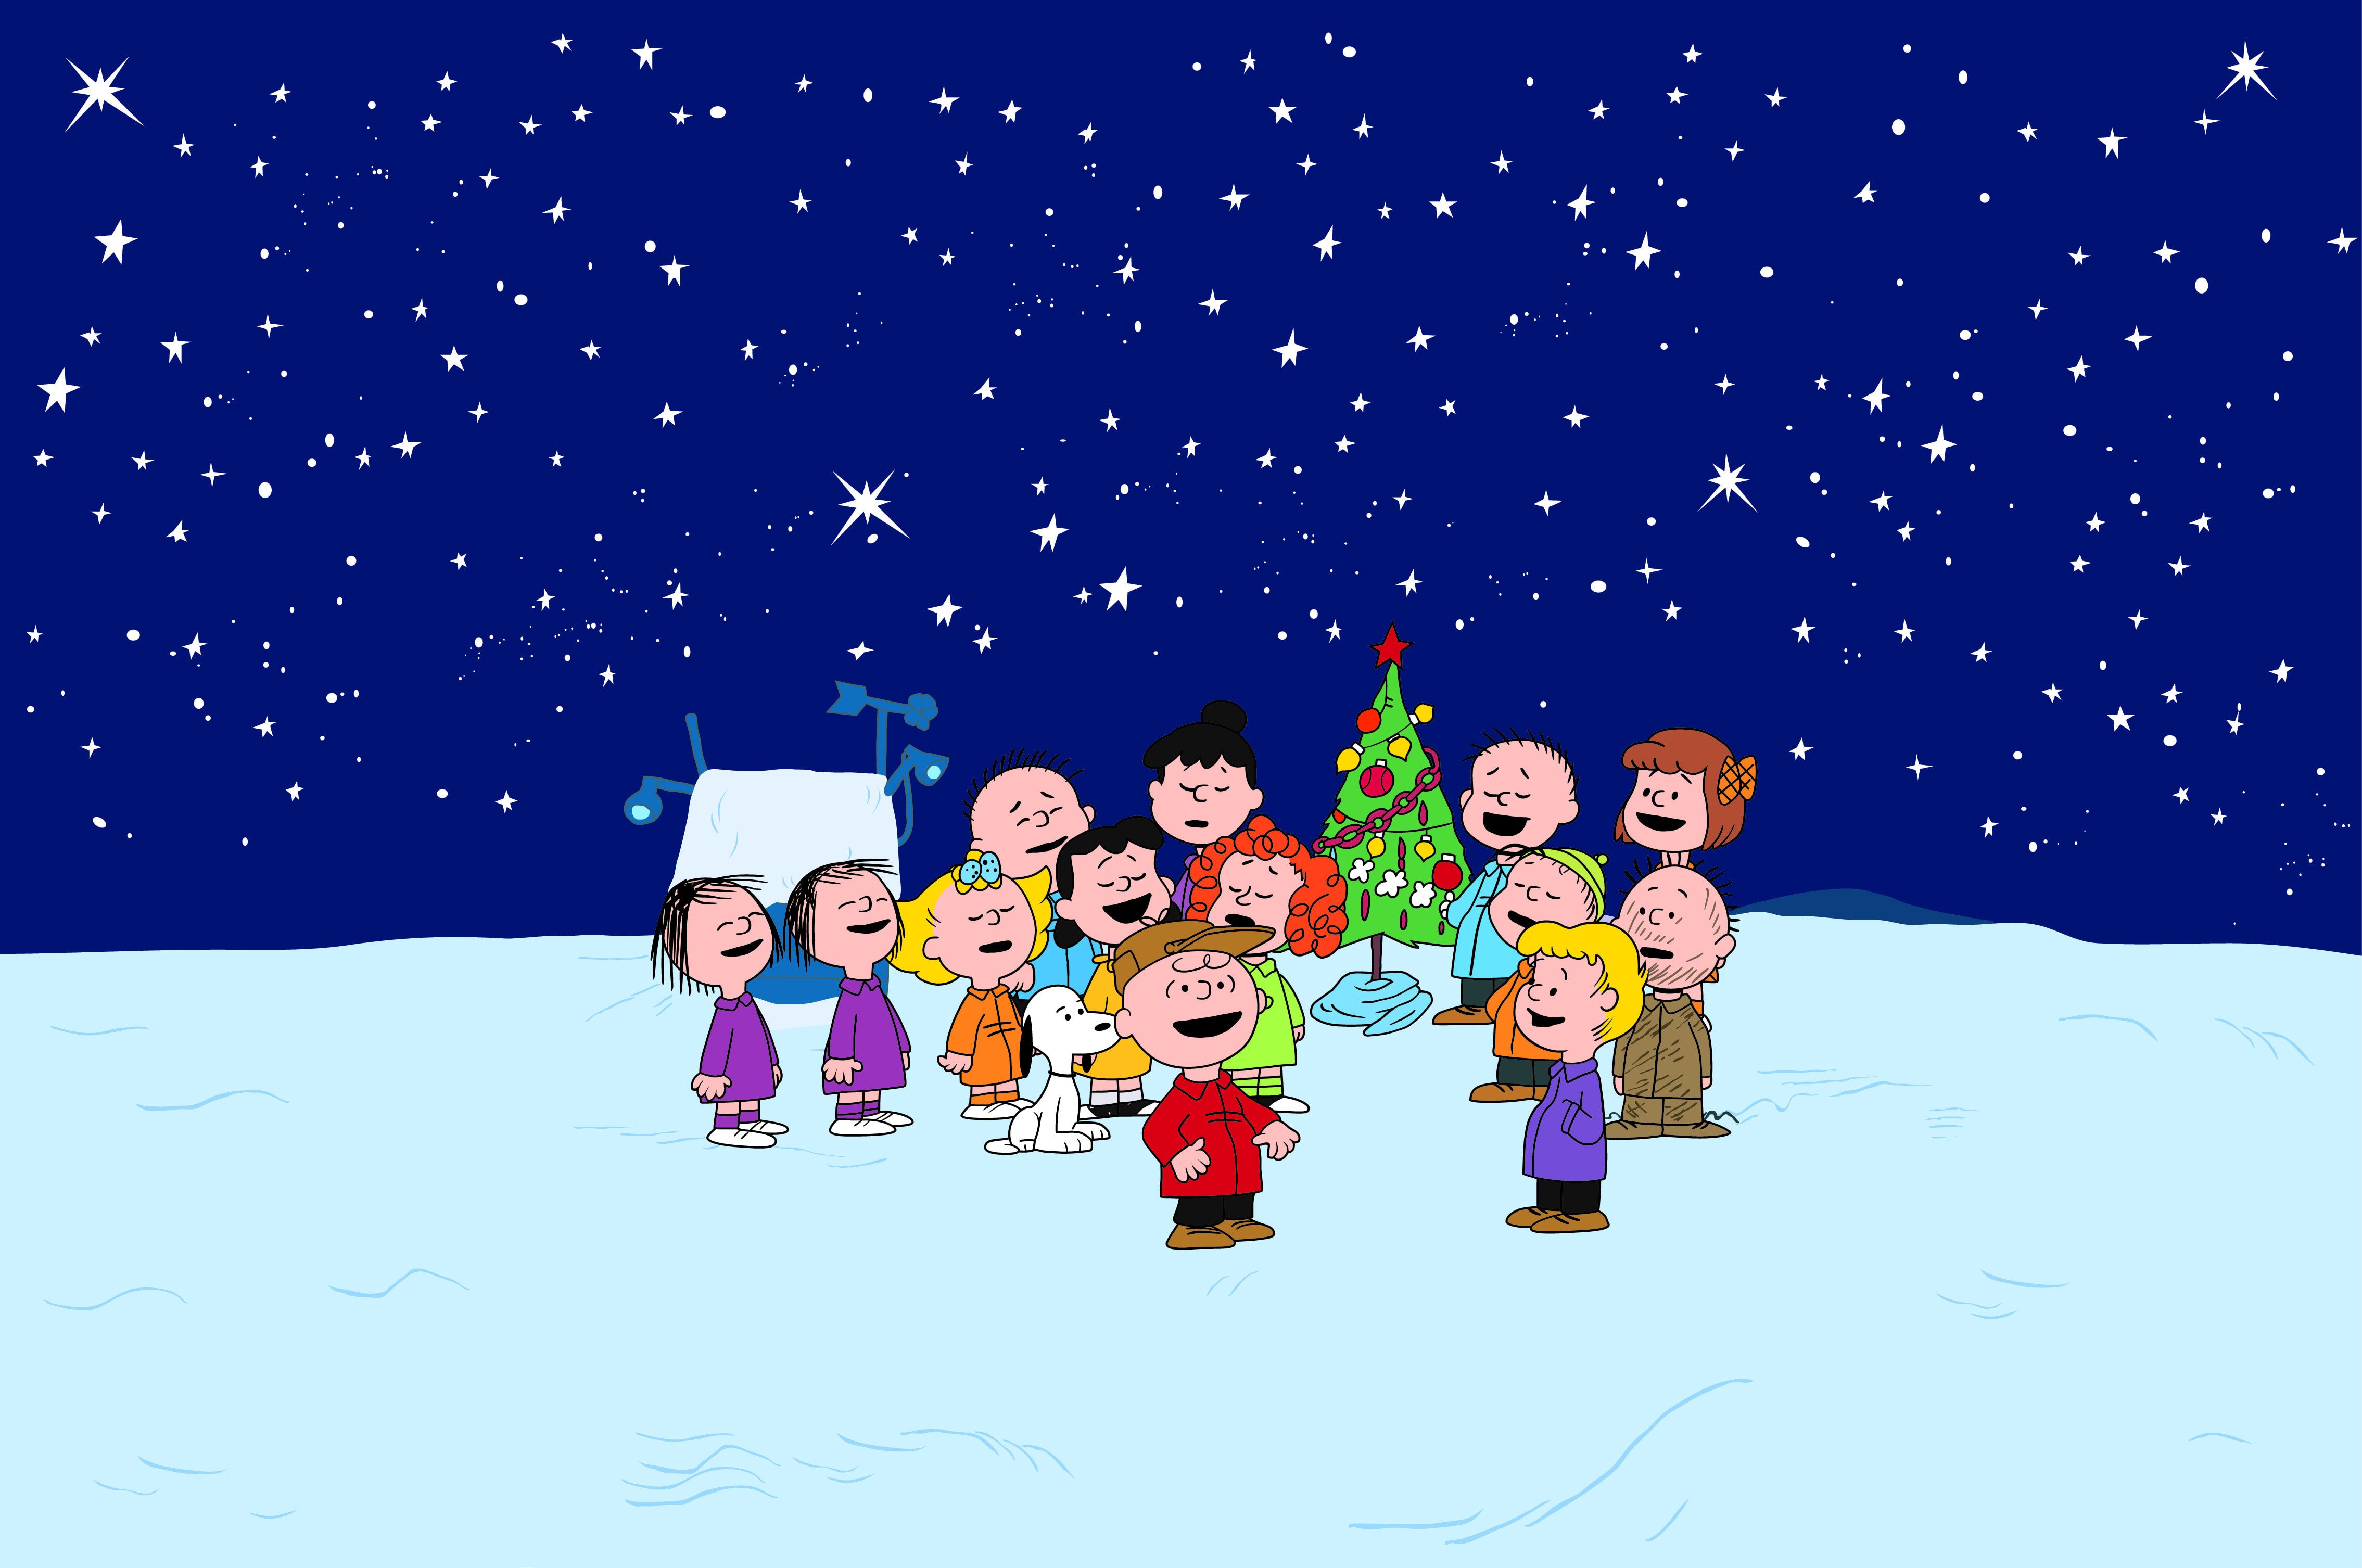 'A Charlie Brown Christmas' How to Stream for Free in 2022